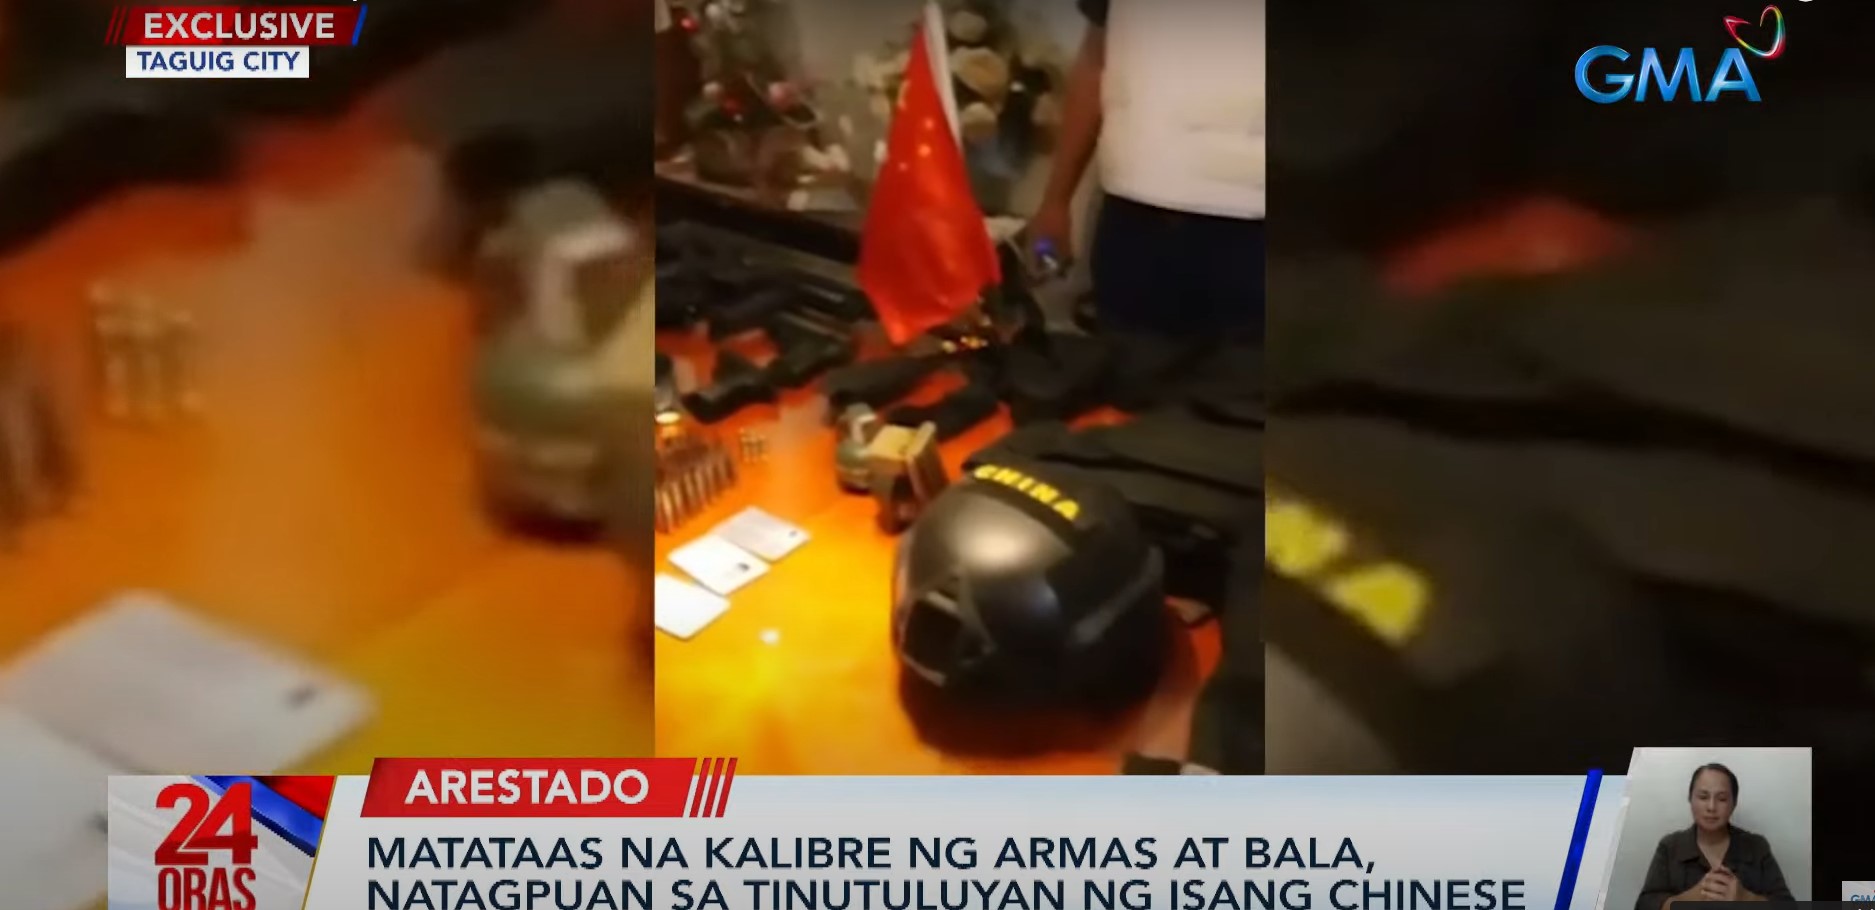 chinese nationals nabbed for illegal firearms, attempted bribery in taguig